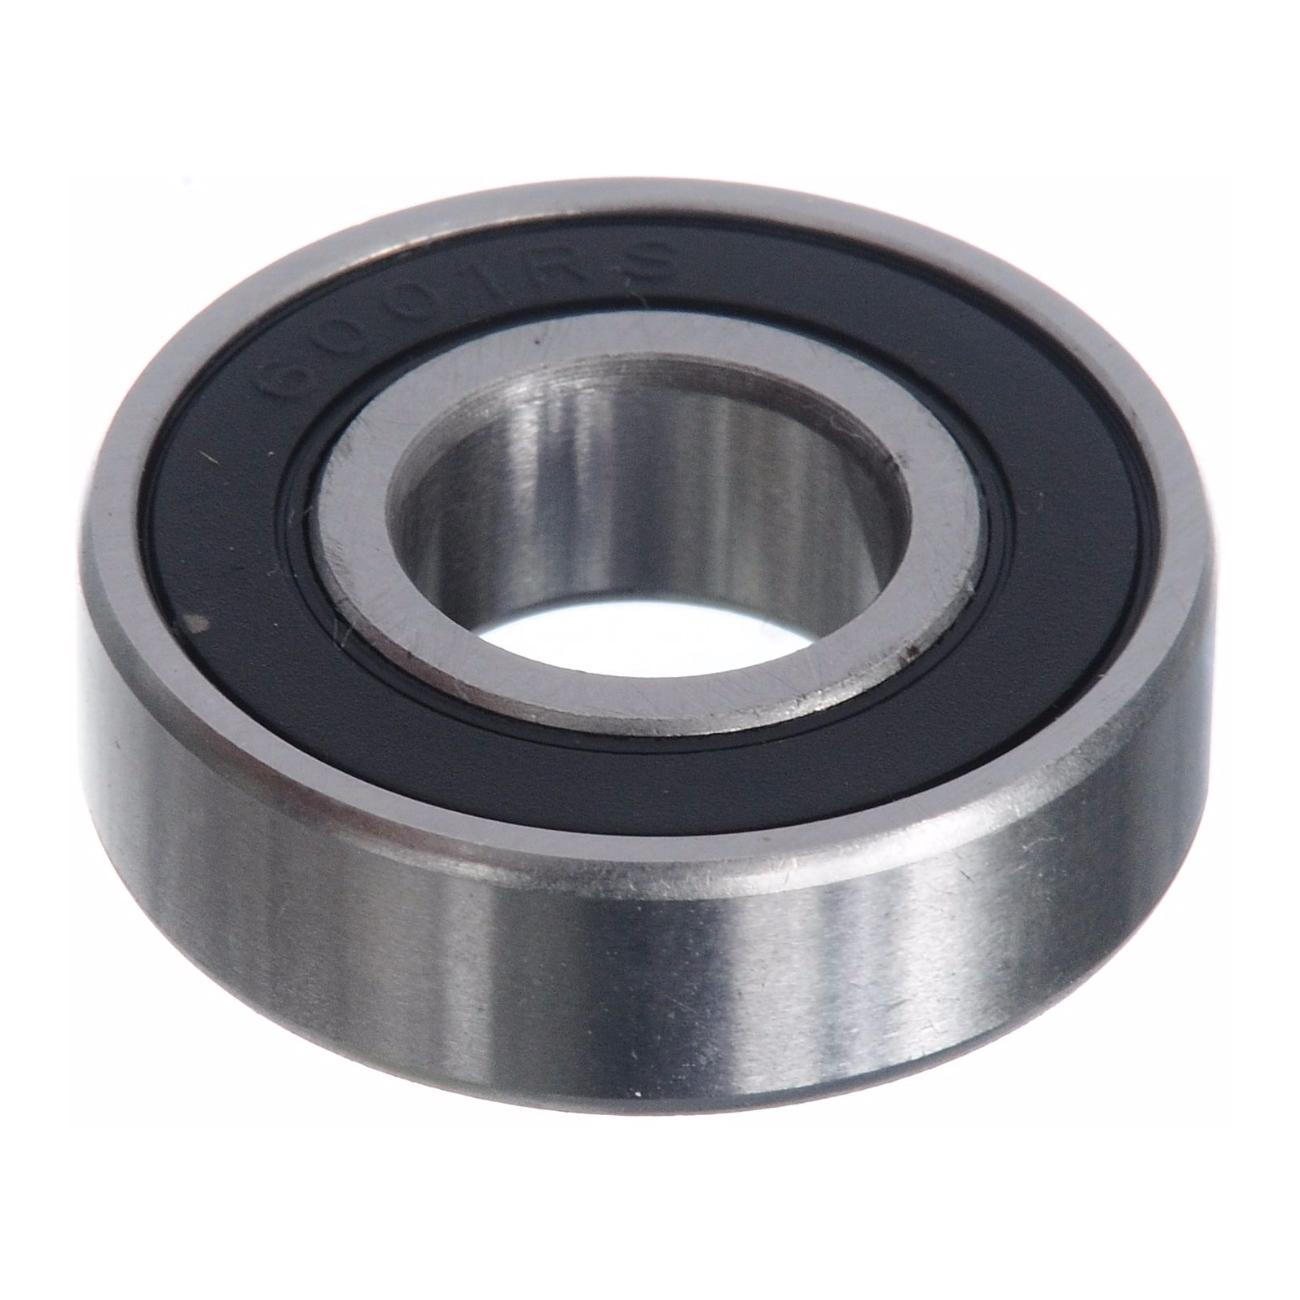 Brand-x Sealed Bearing (6001 2rs)  Silver